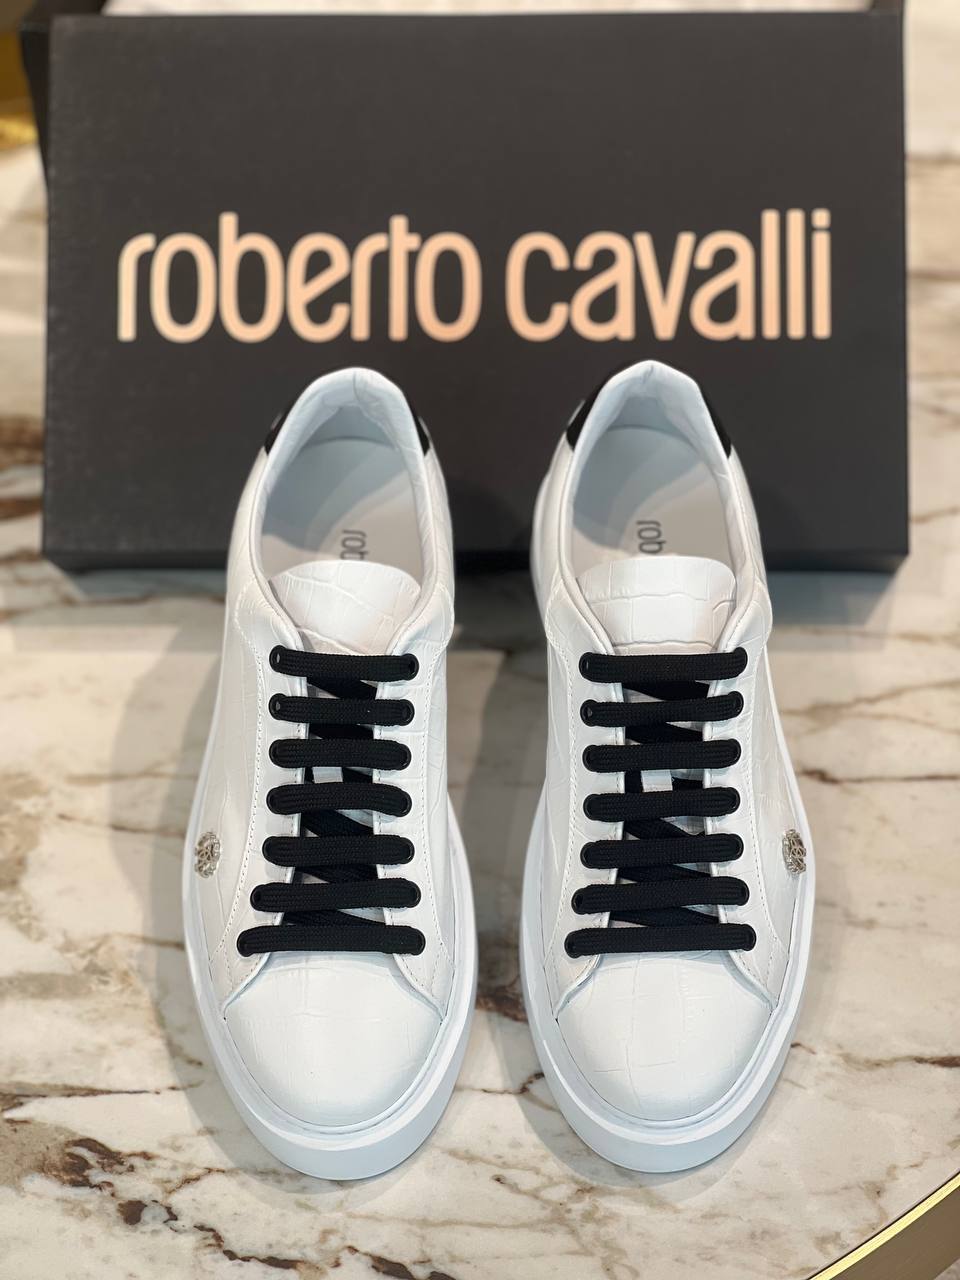 Roberto Cavalli Outlets 6083